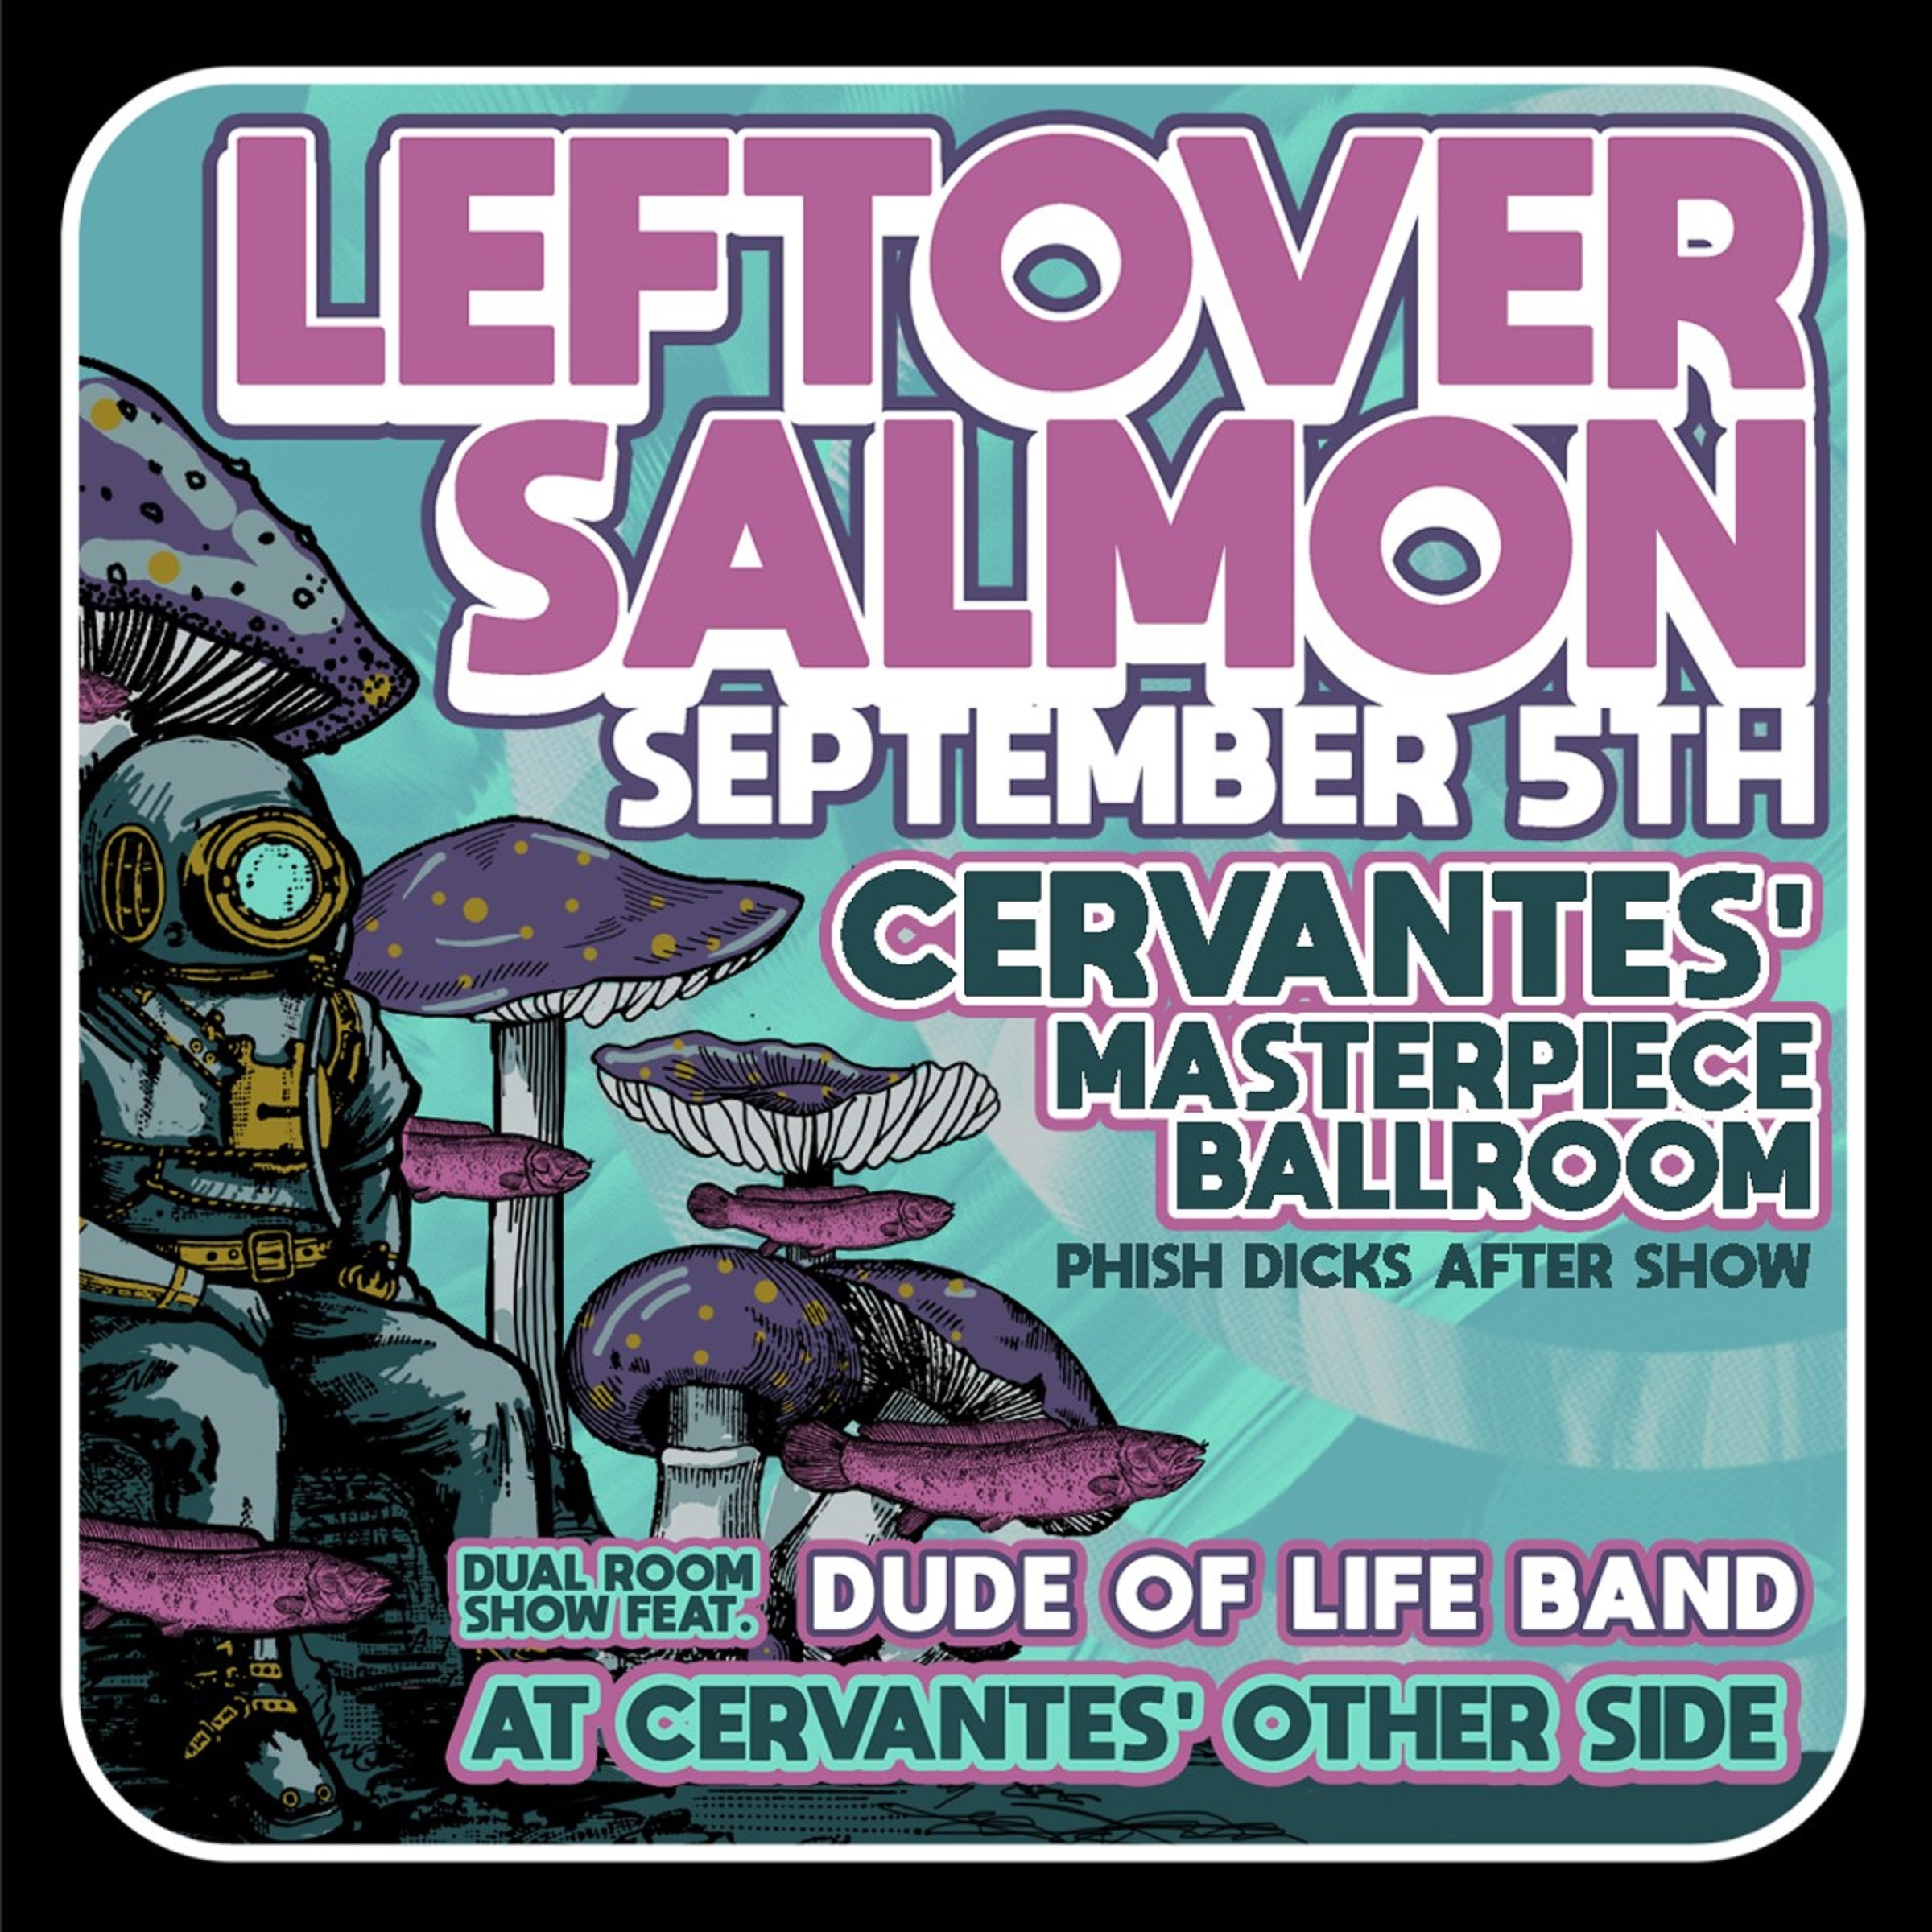 Catch the Phish after-show by Leftover Salmon 